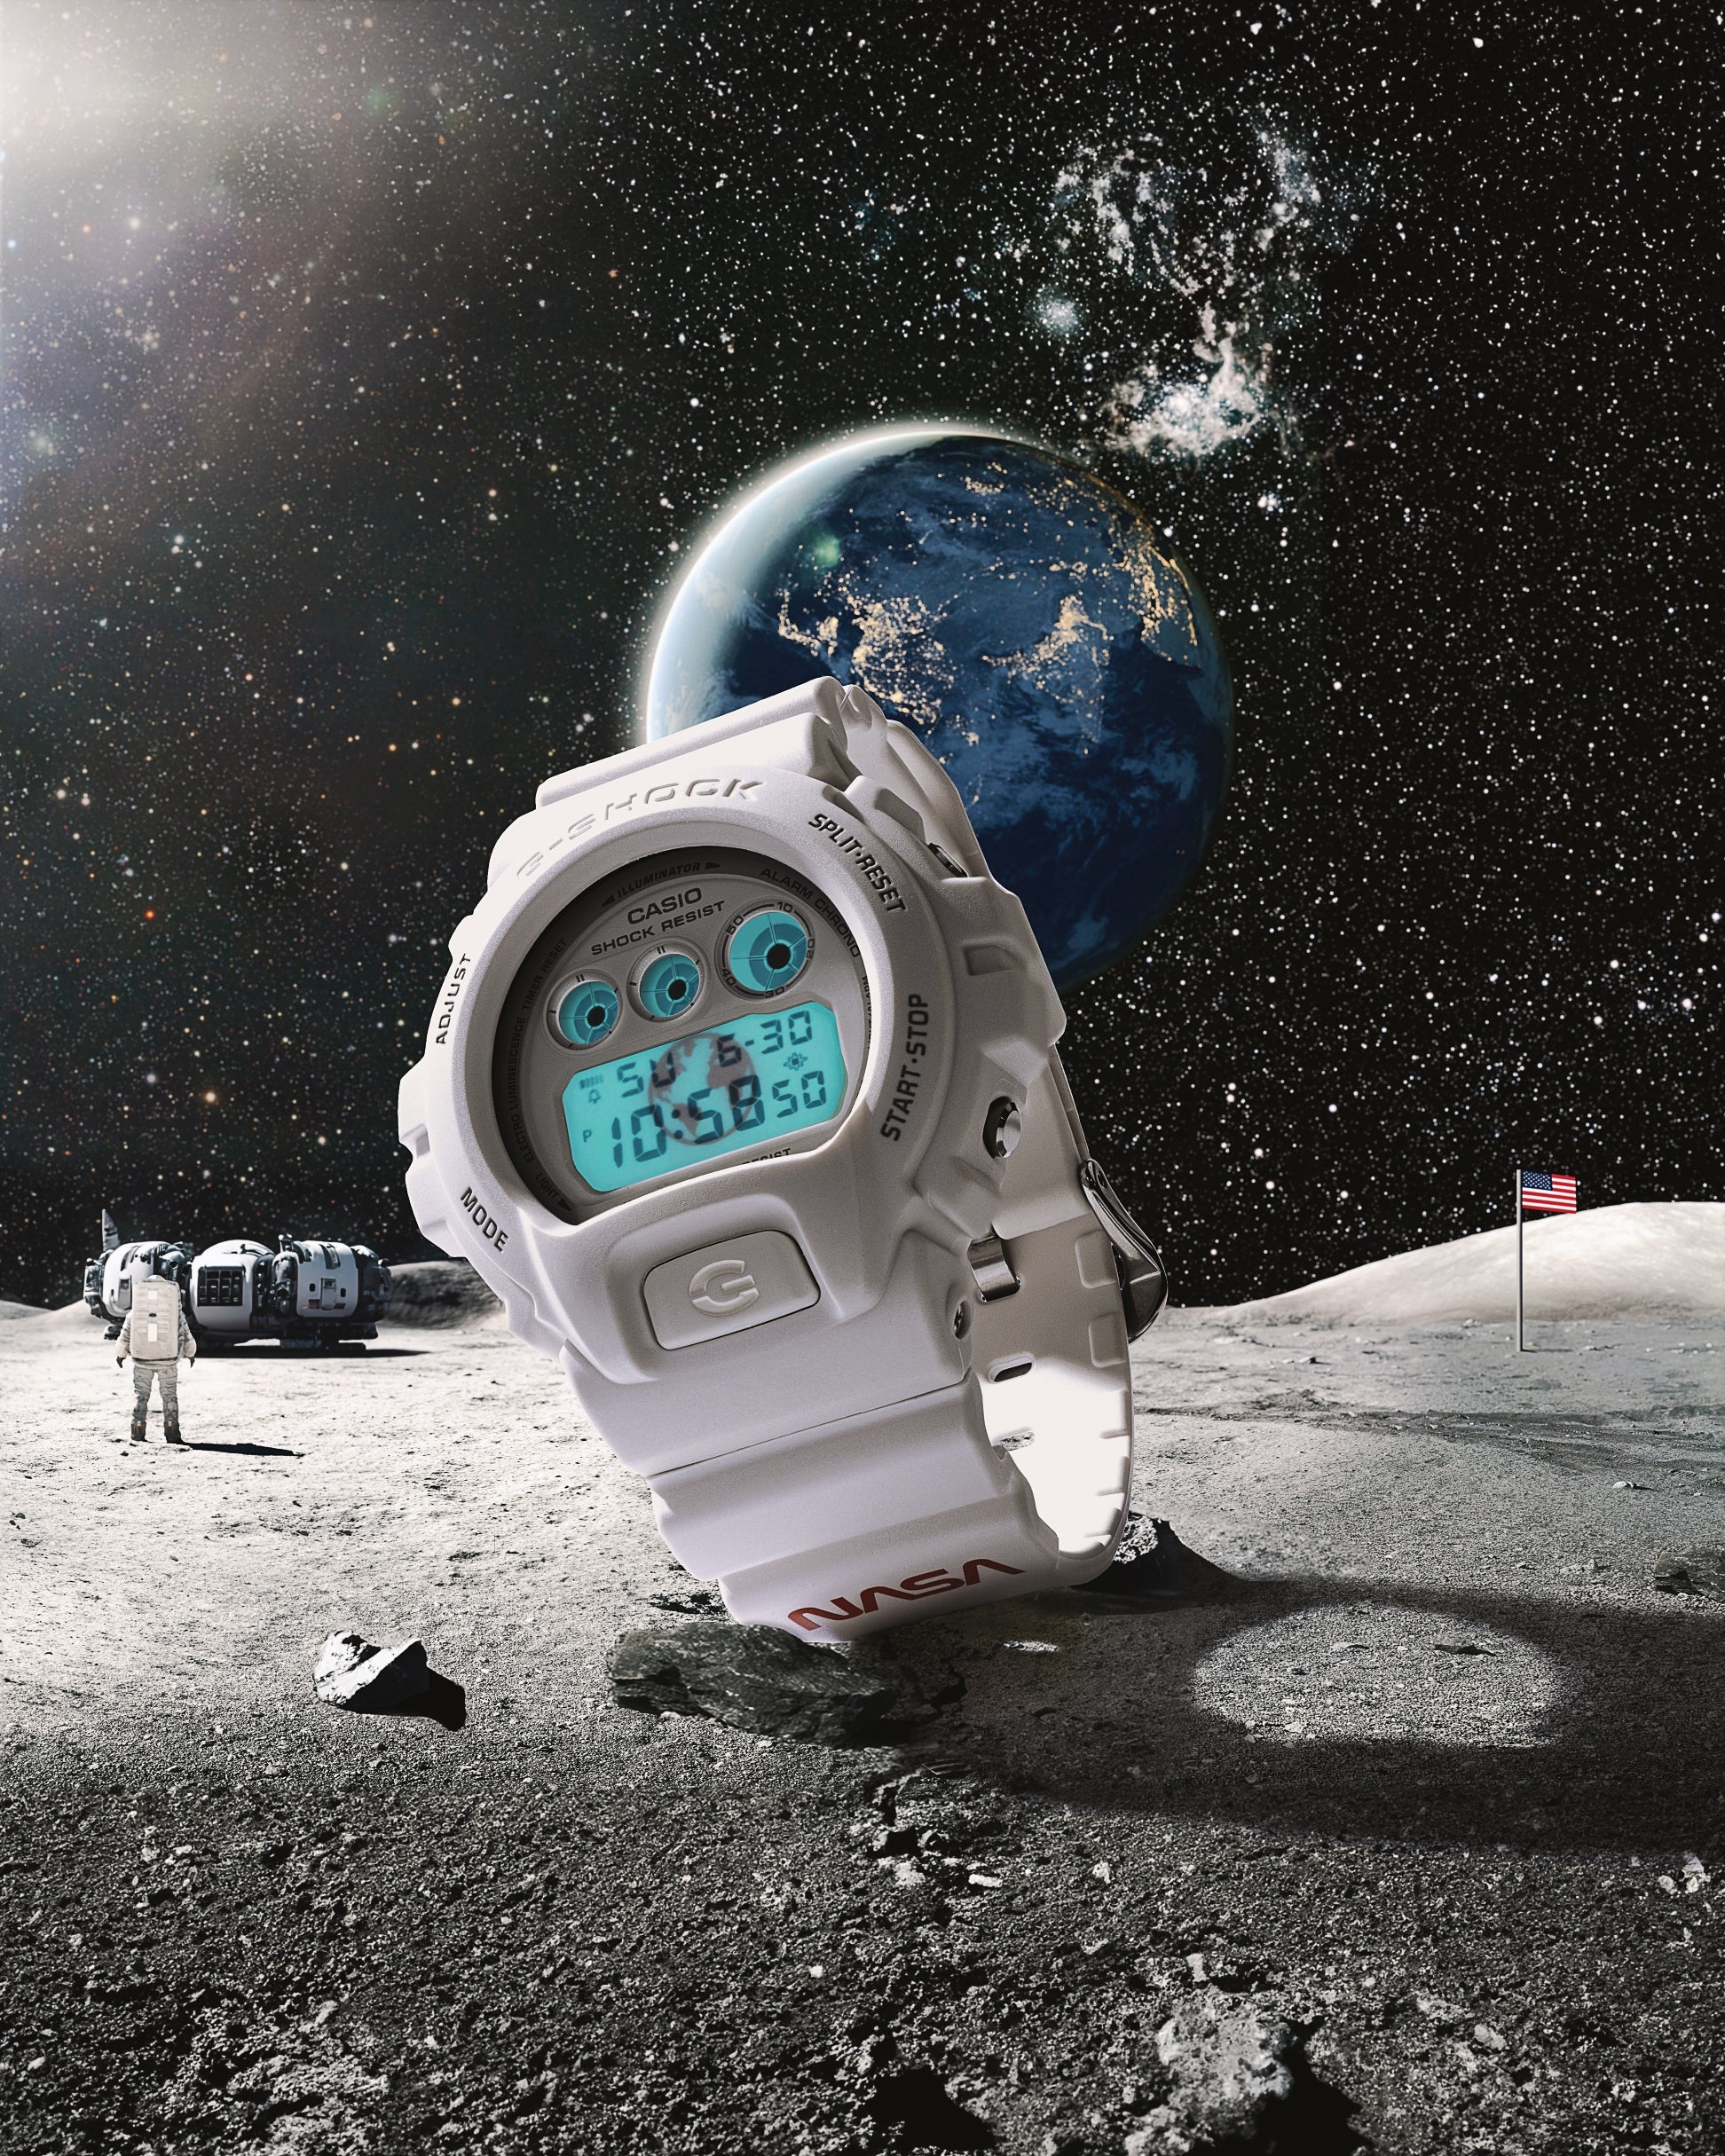 Image of the G-Shock DW6900NASA237 Digit Watch a tribute to NASA. The watch is featured on on the moon in outer space paying homage to the moon landing.